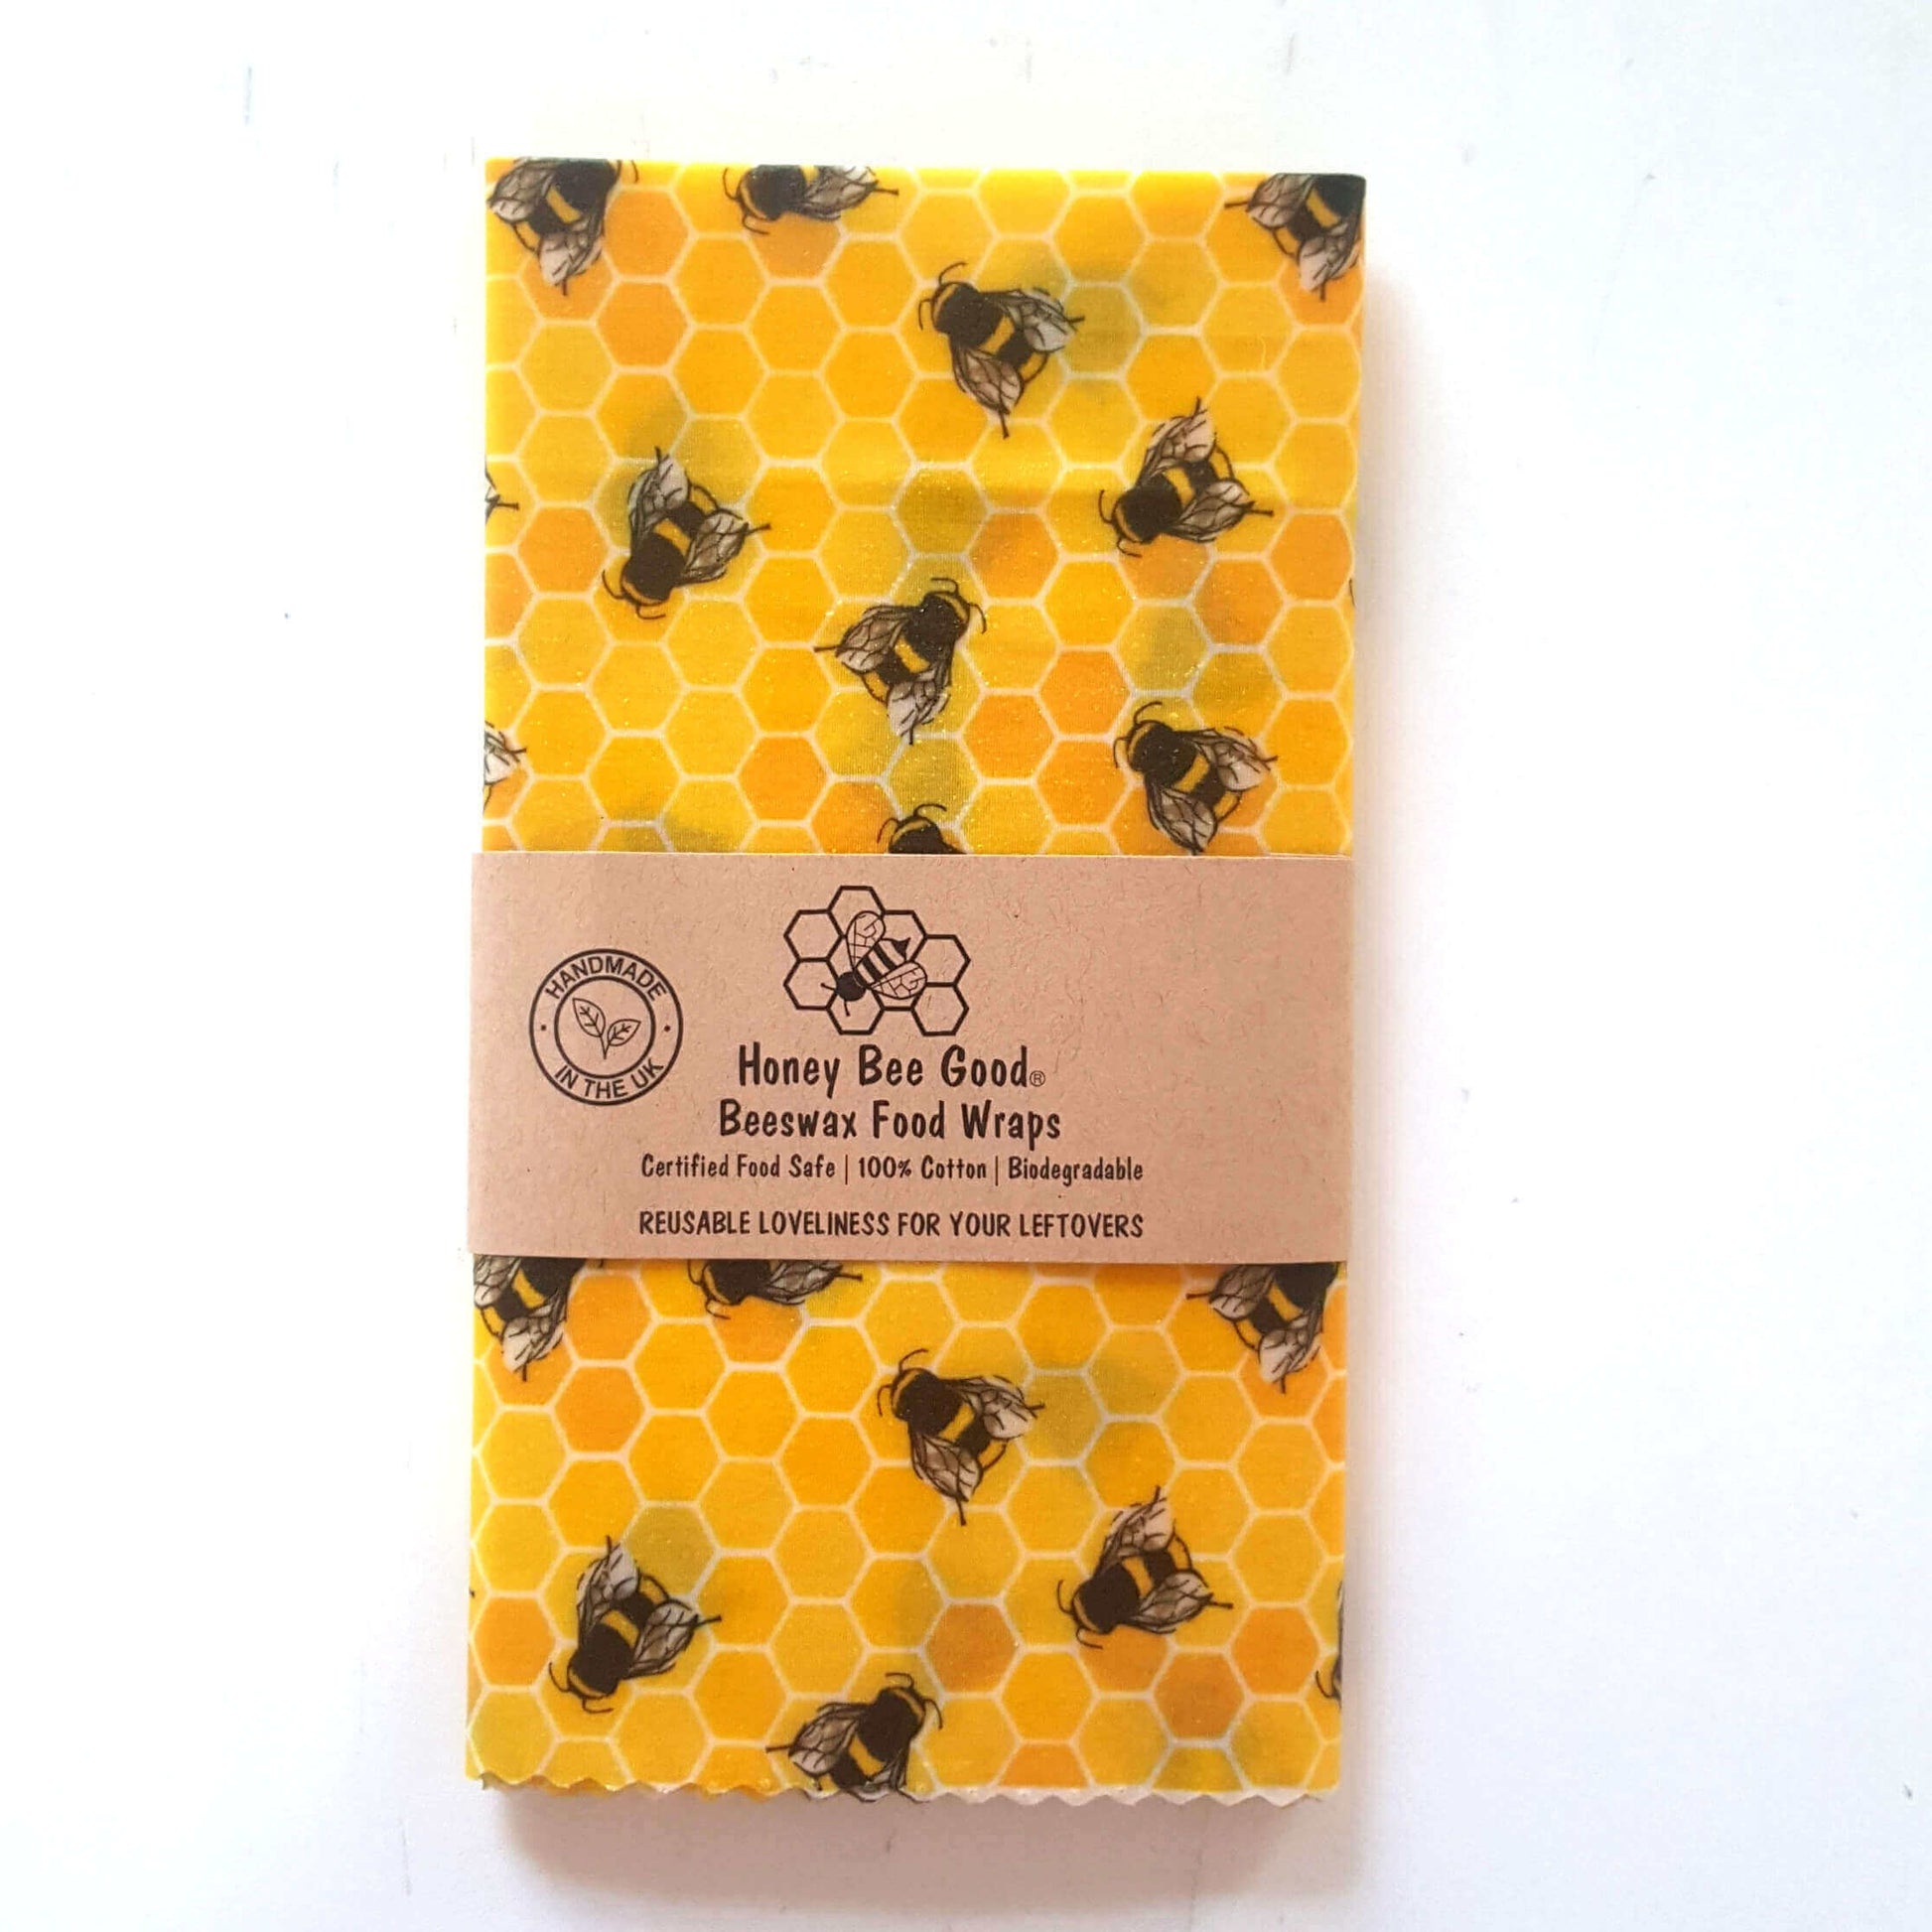 Reusable Beeswax Food Wraps 100% Hand Made in the UK by Honey Bee Good shown in Classic XXL Bread Wrap yellow bees